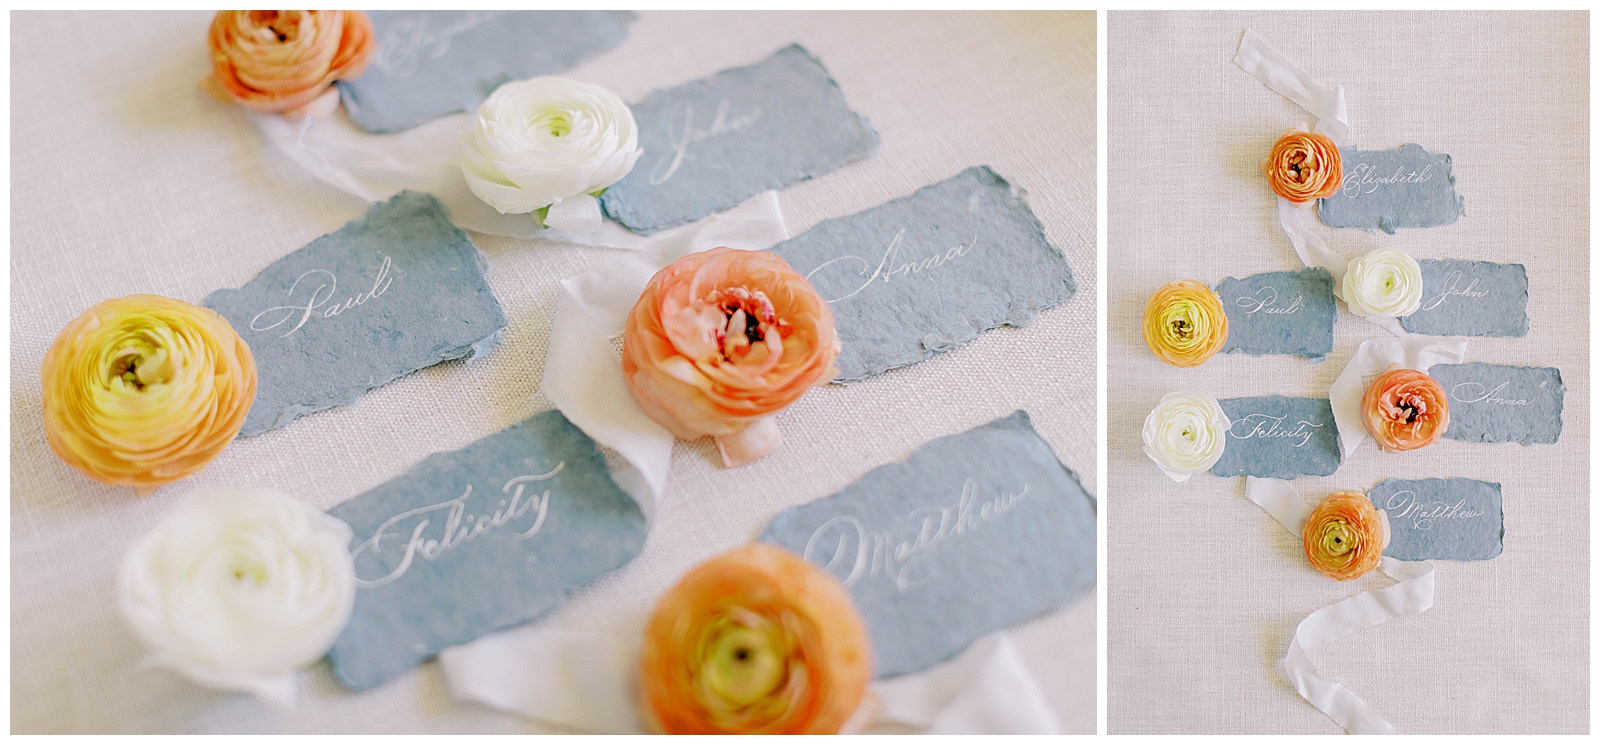 Dusty blue handmade paper place cards